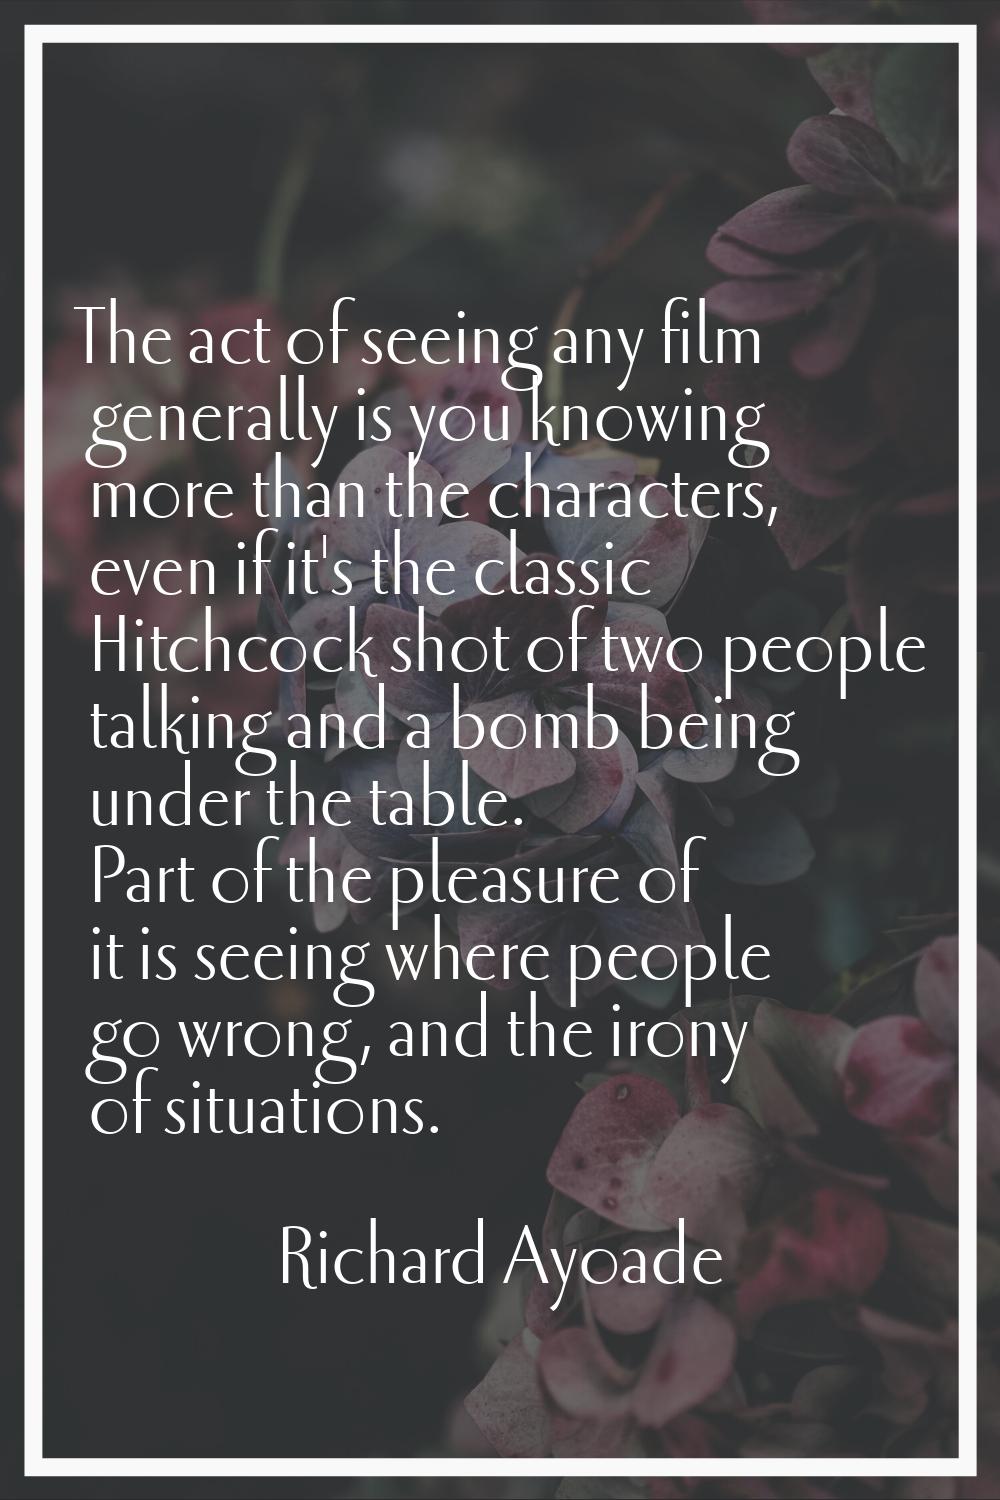 The act of seeing any film generally is you knowing more than the characters, even if it's the clas